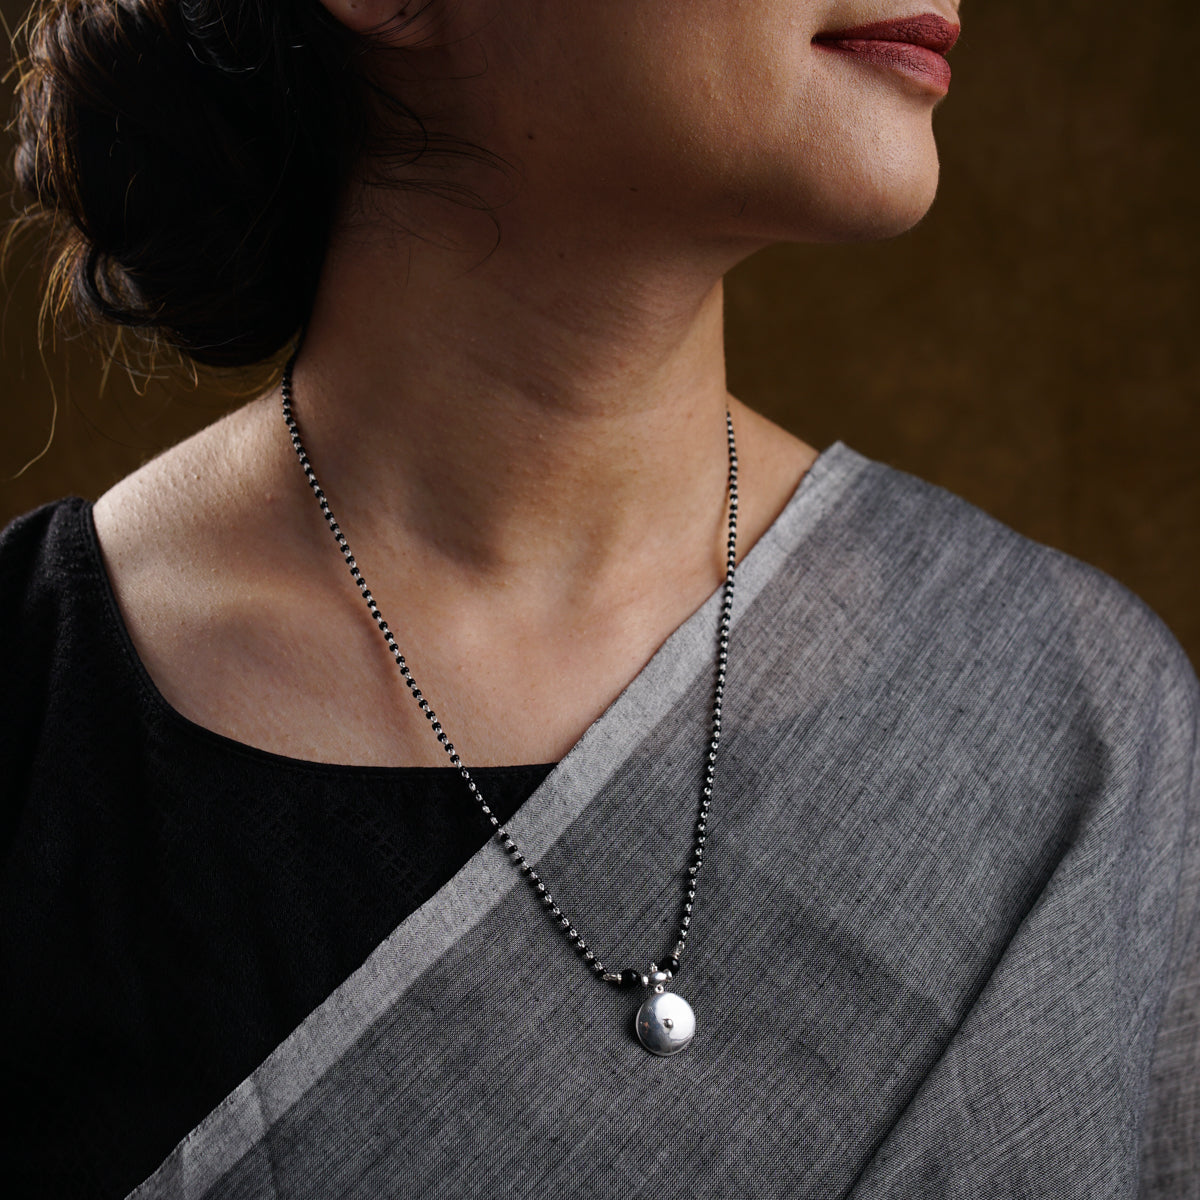 a woman wearing a black and white necklace